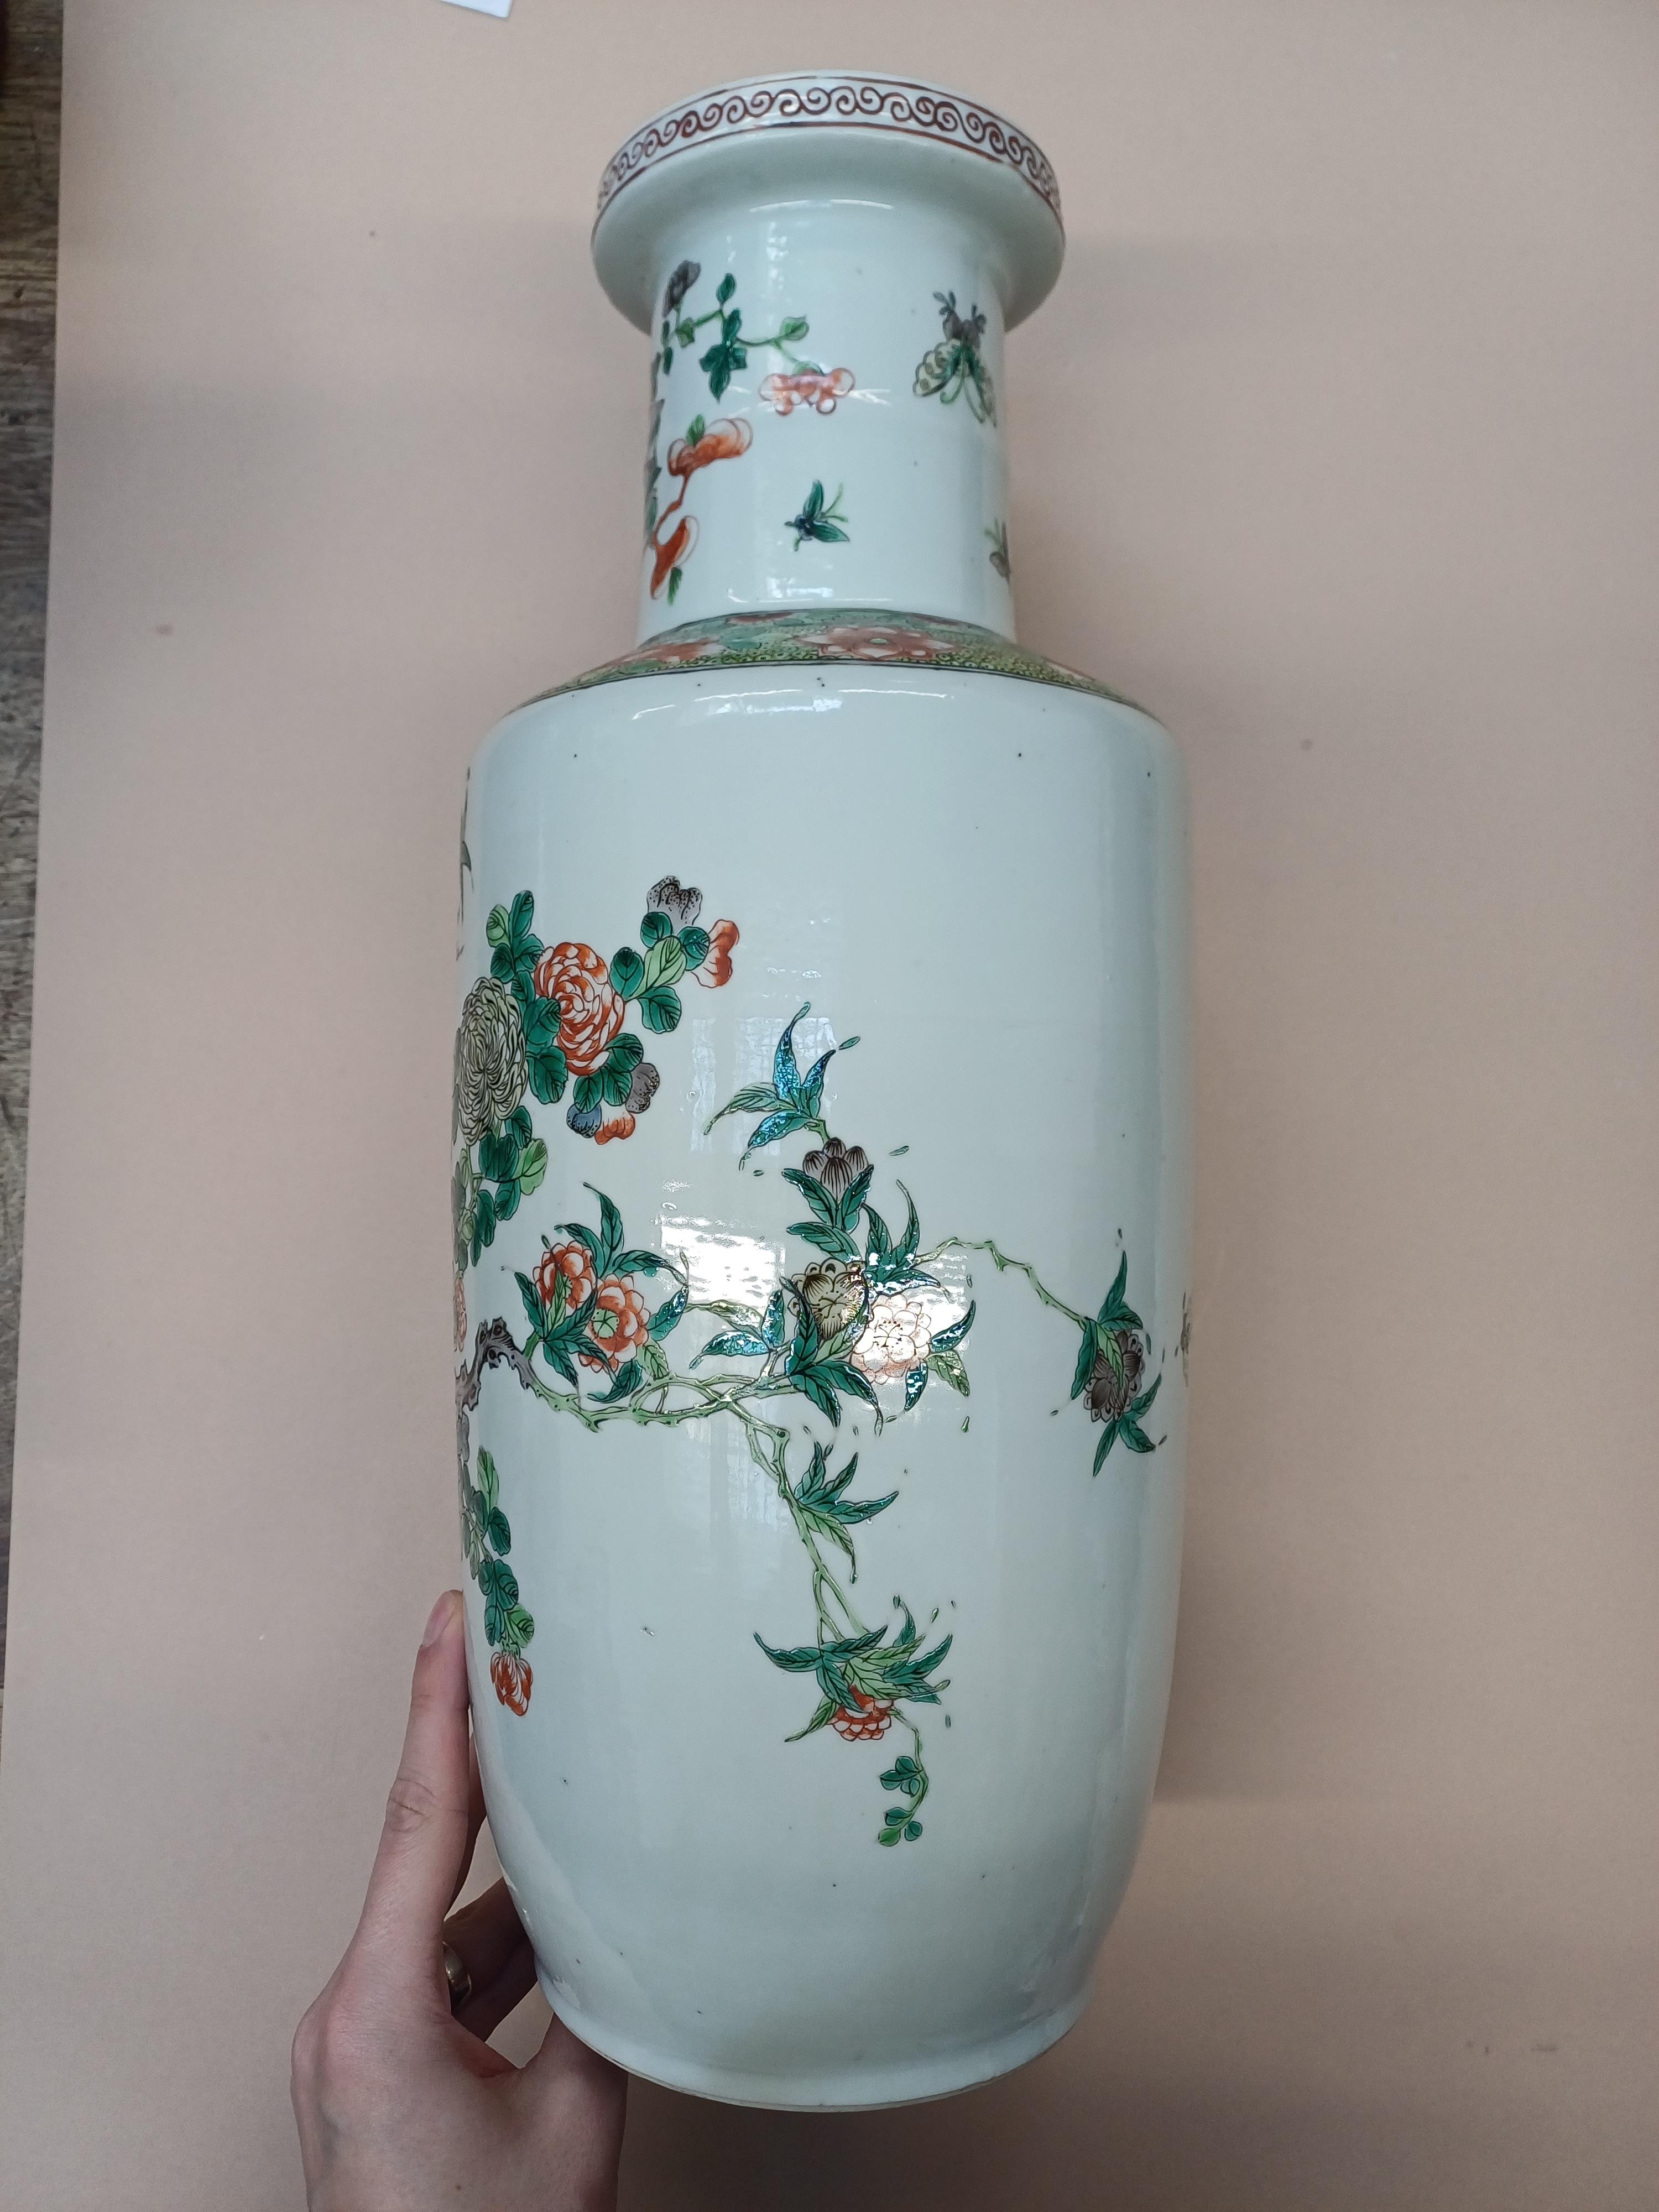 A PAIR OF FINE CHINESE FAMILLE-VERTE ‘BIRD AND BLOSSOM’ VASES 清康熙 五彩花鳥圖紋瓶一對 - Image 13 of 16